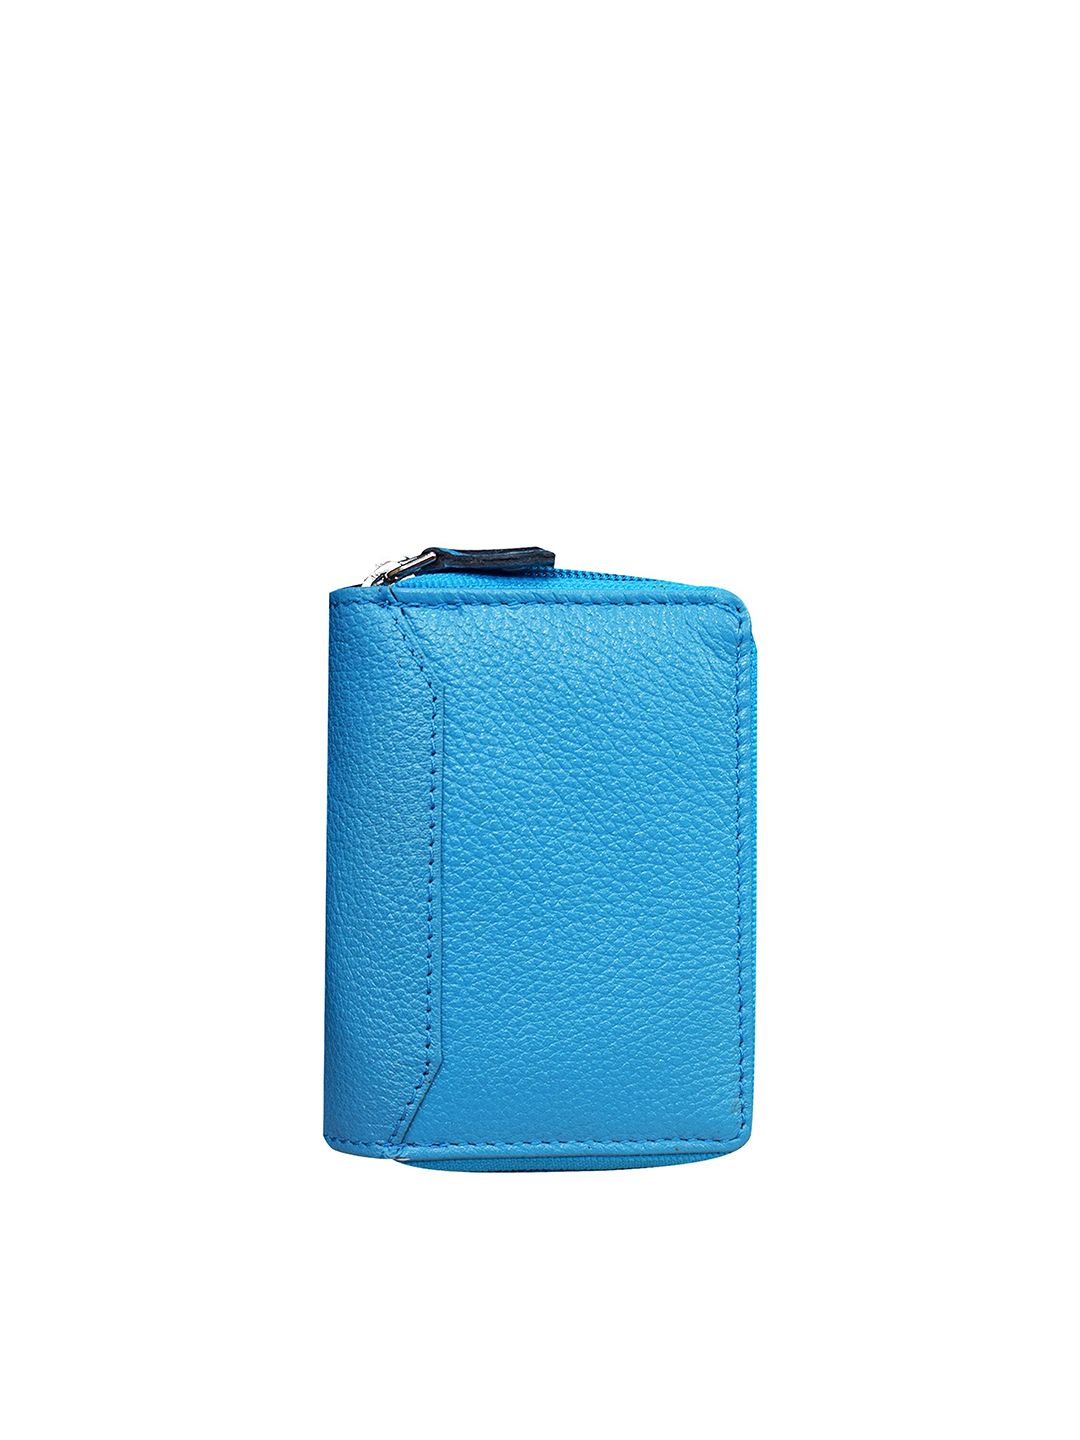 ABYS Unisex Blue Leather Zip Around Wallet Price in India